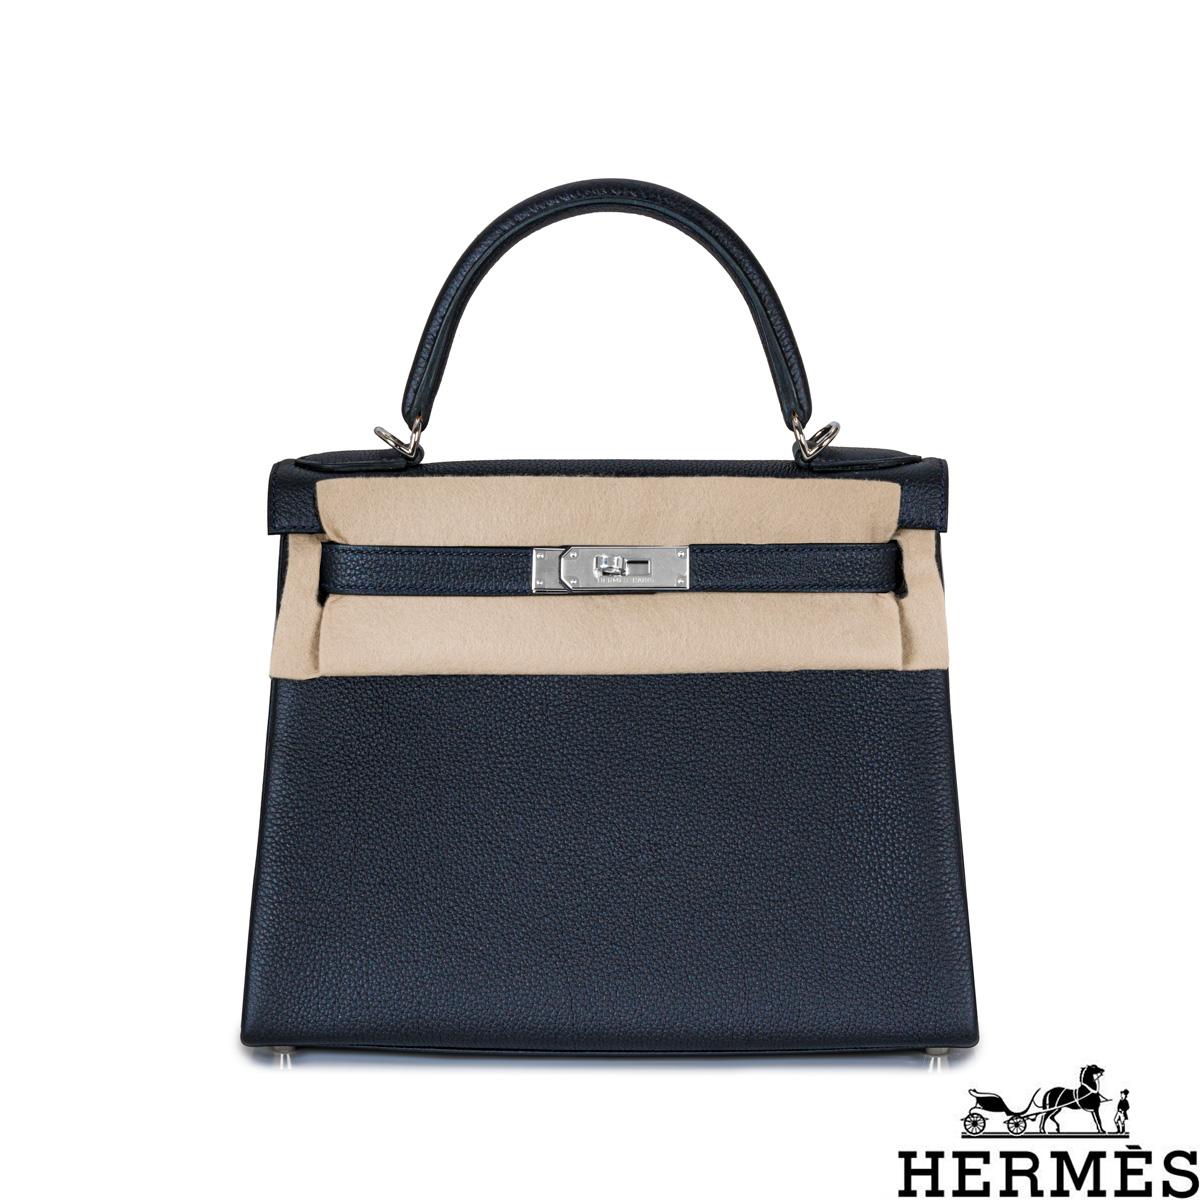 A classic Hermès Kelly II Retourne 28cm handbag. The exterior of this Kelly features the Retourne style in Caban Veau Togo leather and is complemented by palladium hardware and tonal stitchings. It has a front toggle closure with two straps, a